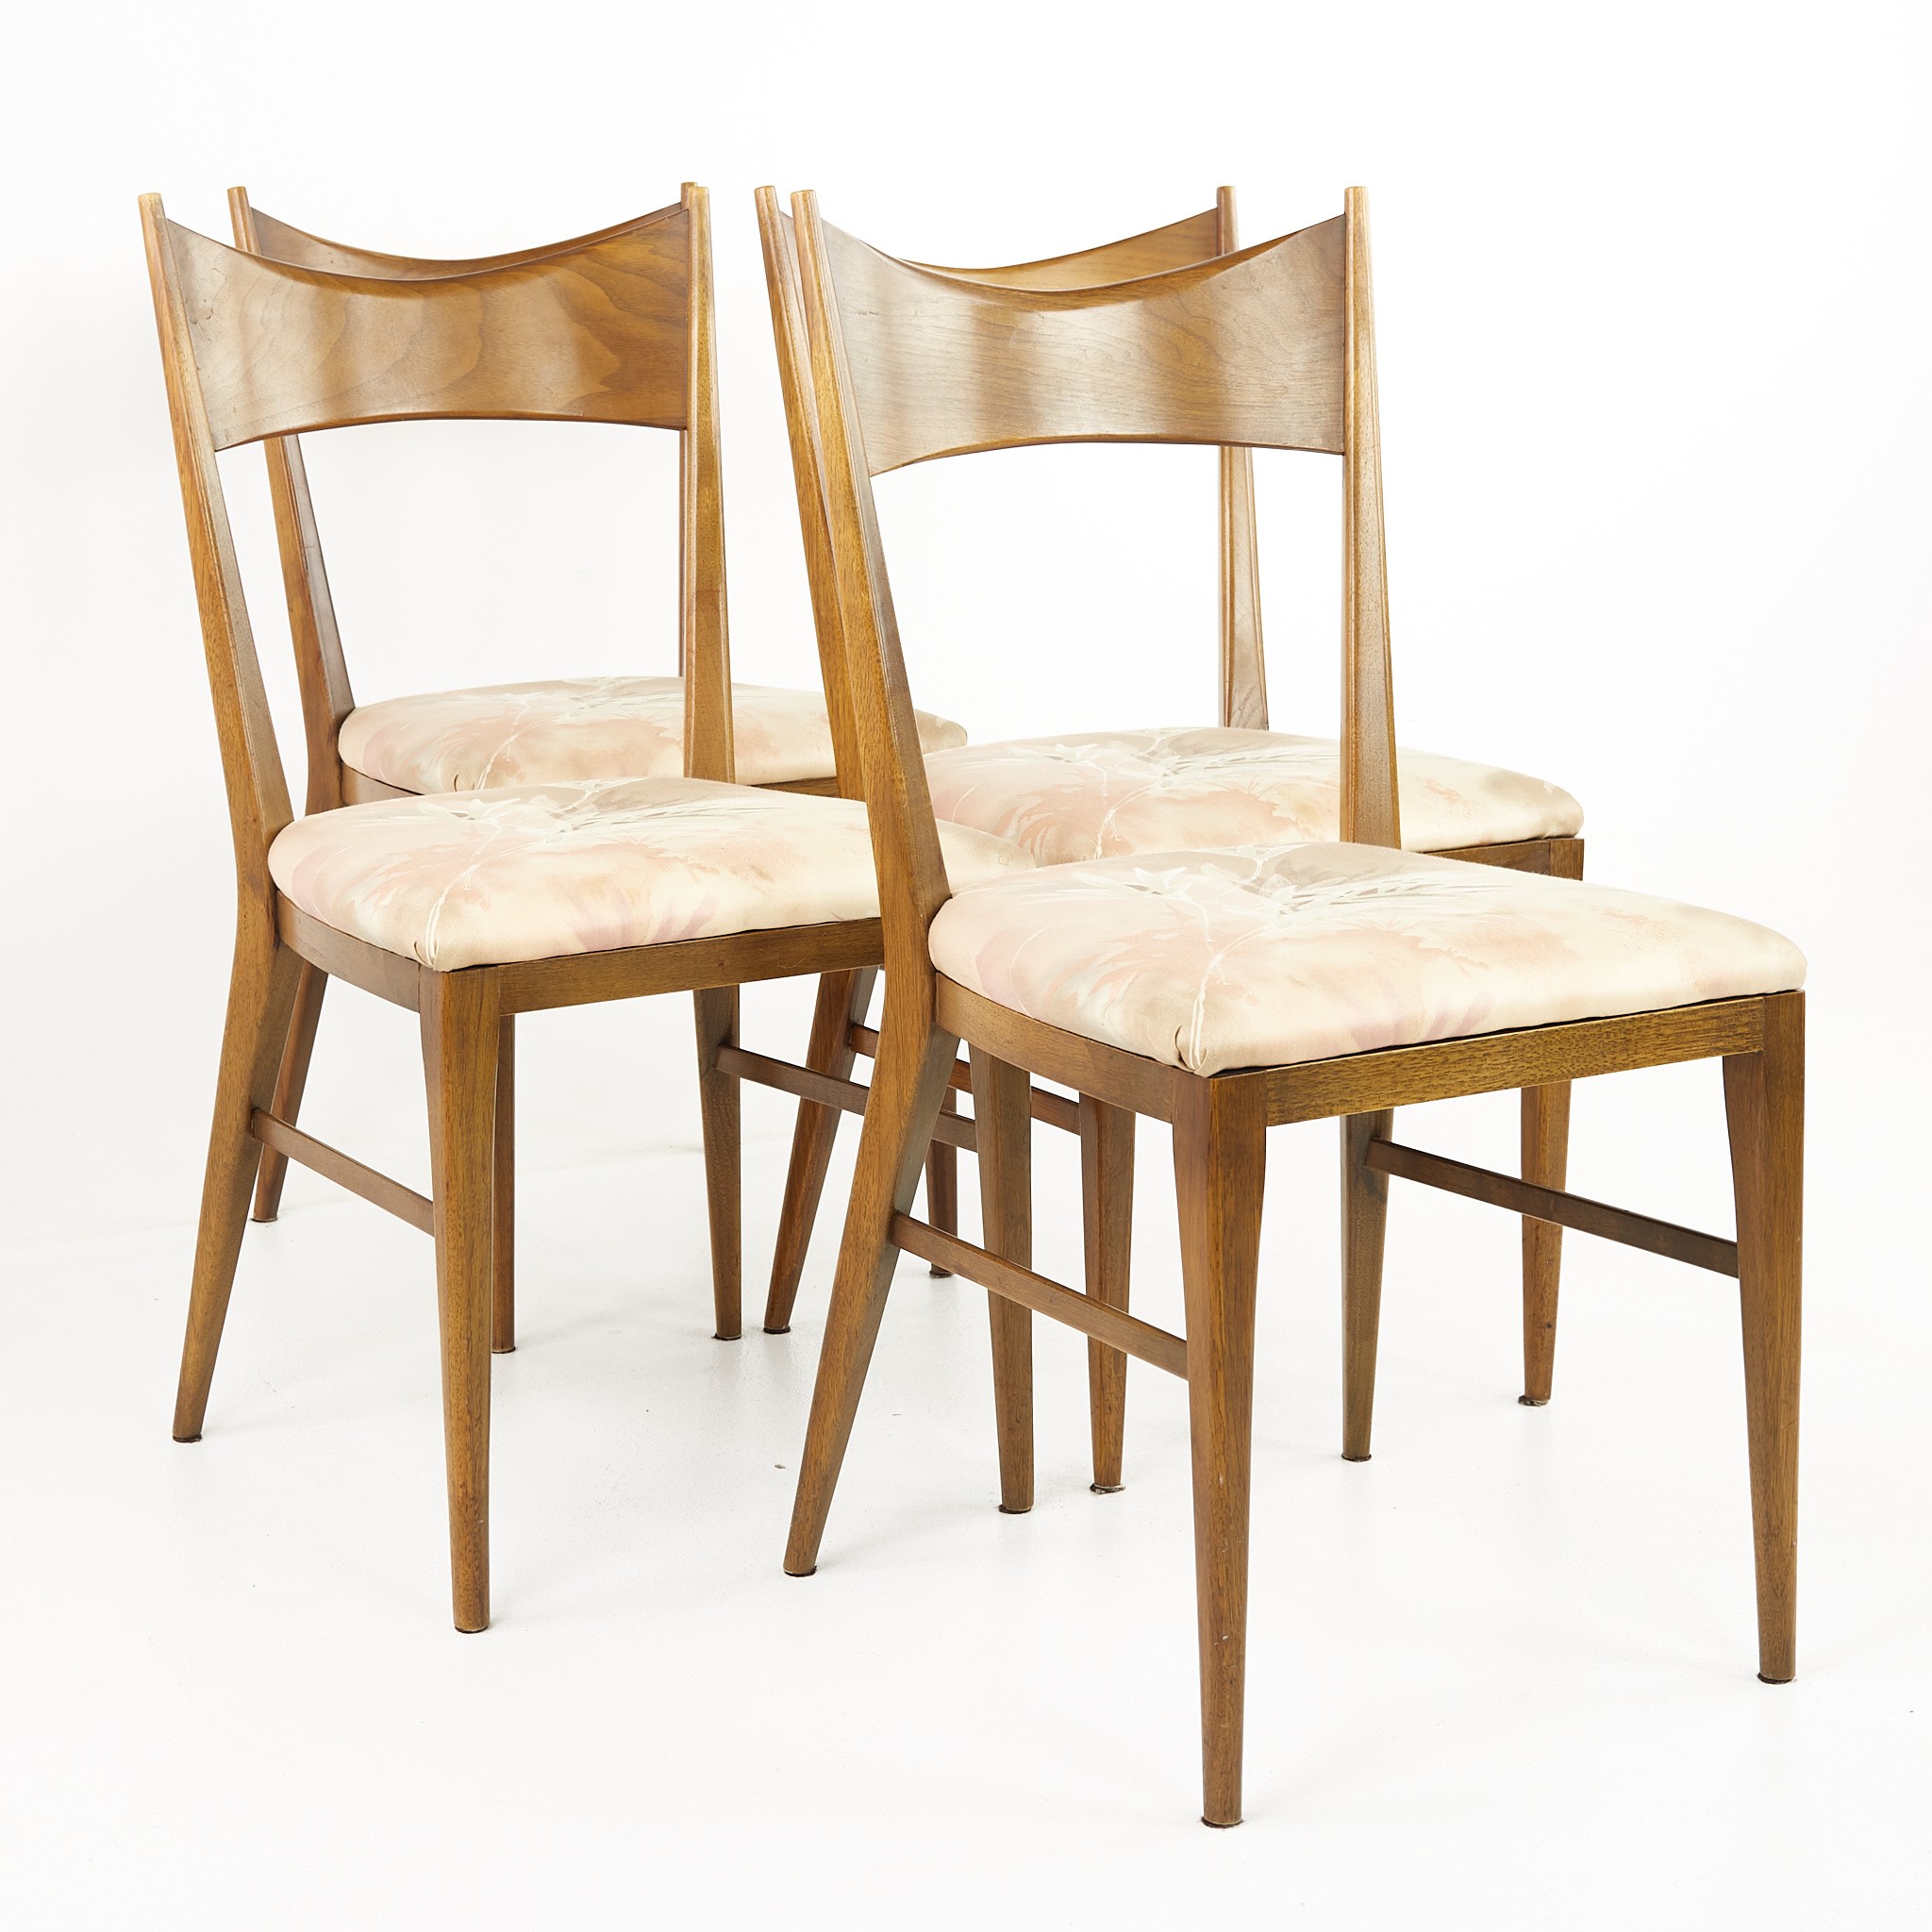 Paul Mccobb for Calvin Mid Century Dining Chairs - Set of 4